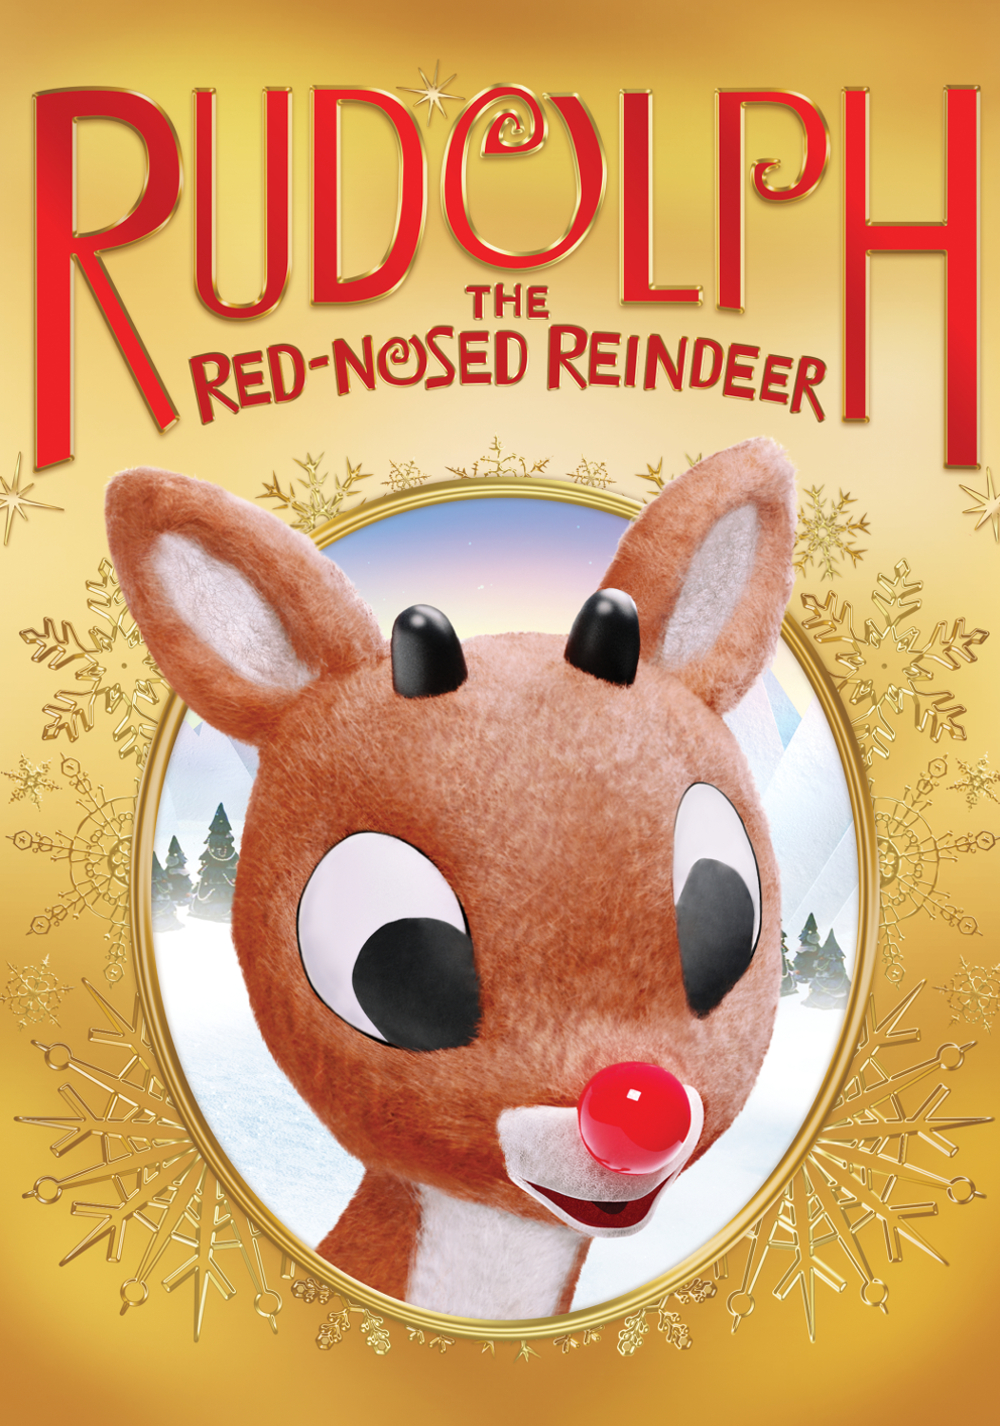 Today in Religion – Rudolph